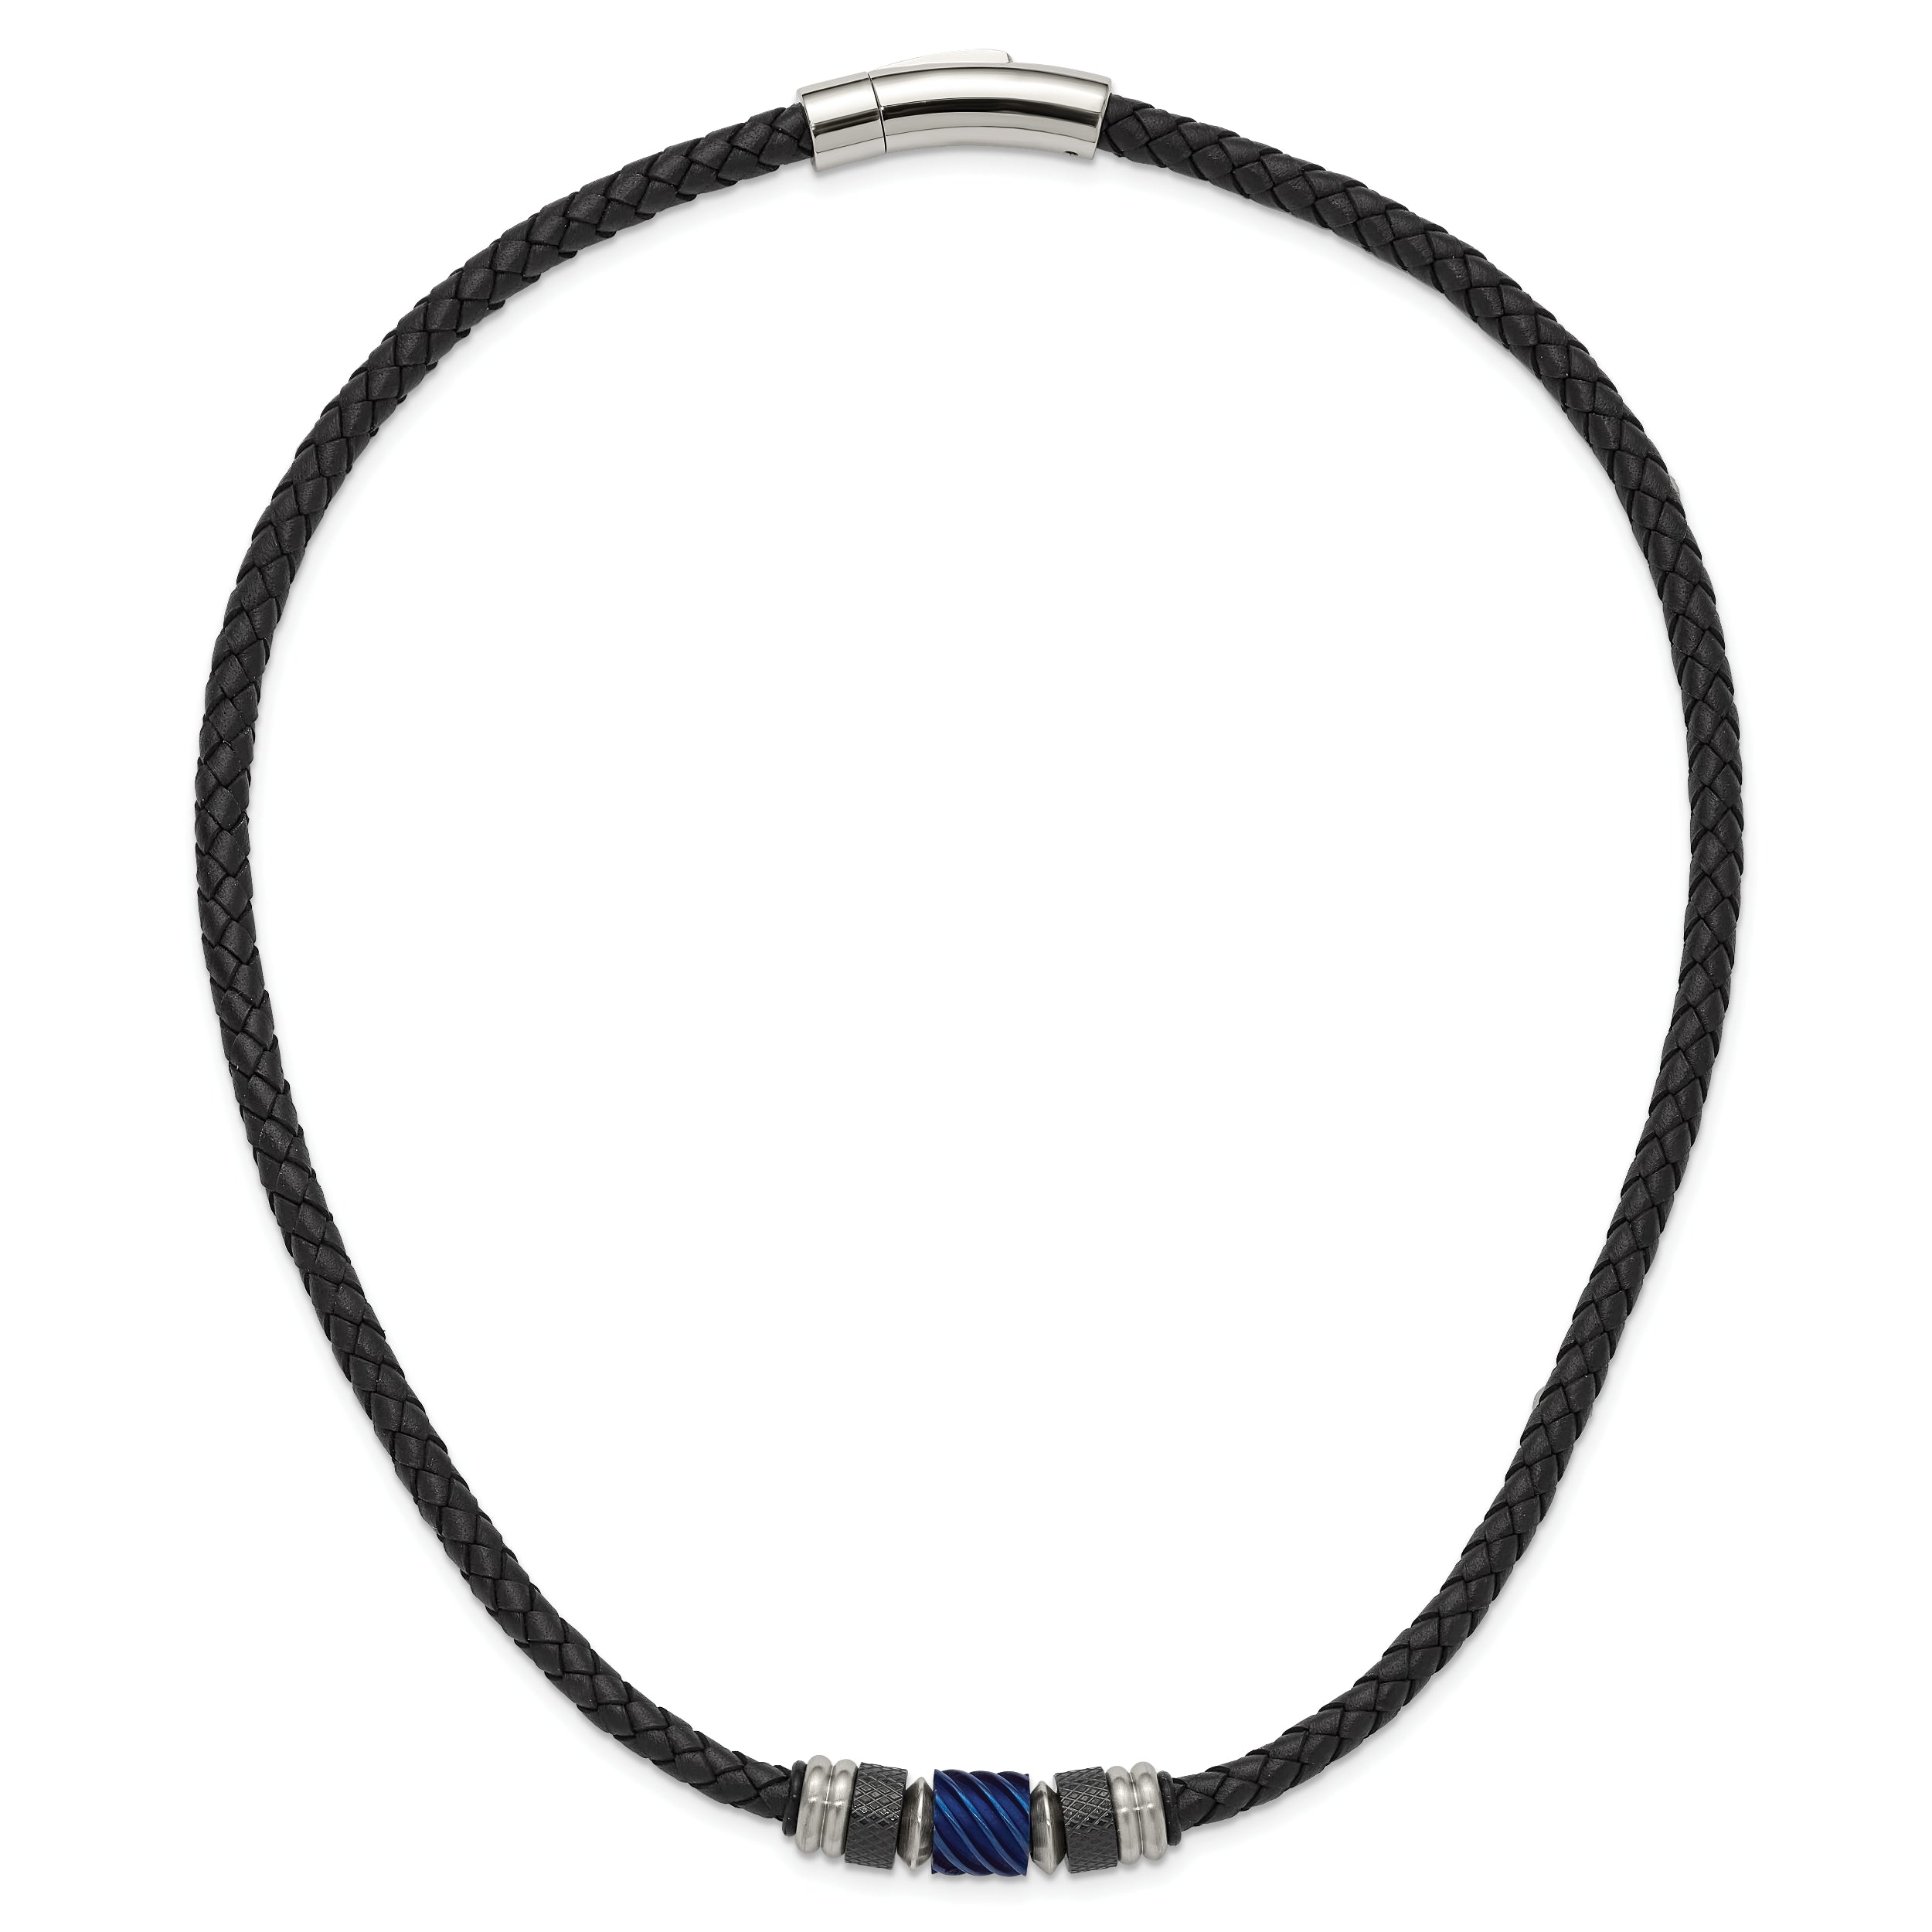 Chisel Stainless Steel Brushed and Polished Black and Blue IP-plated Black Rubber 20 inch Leather Necklace